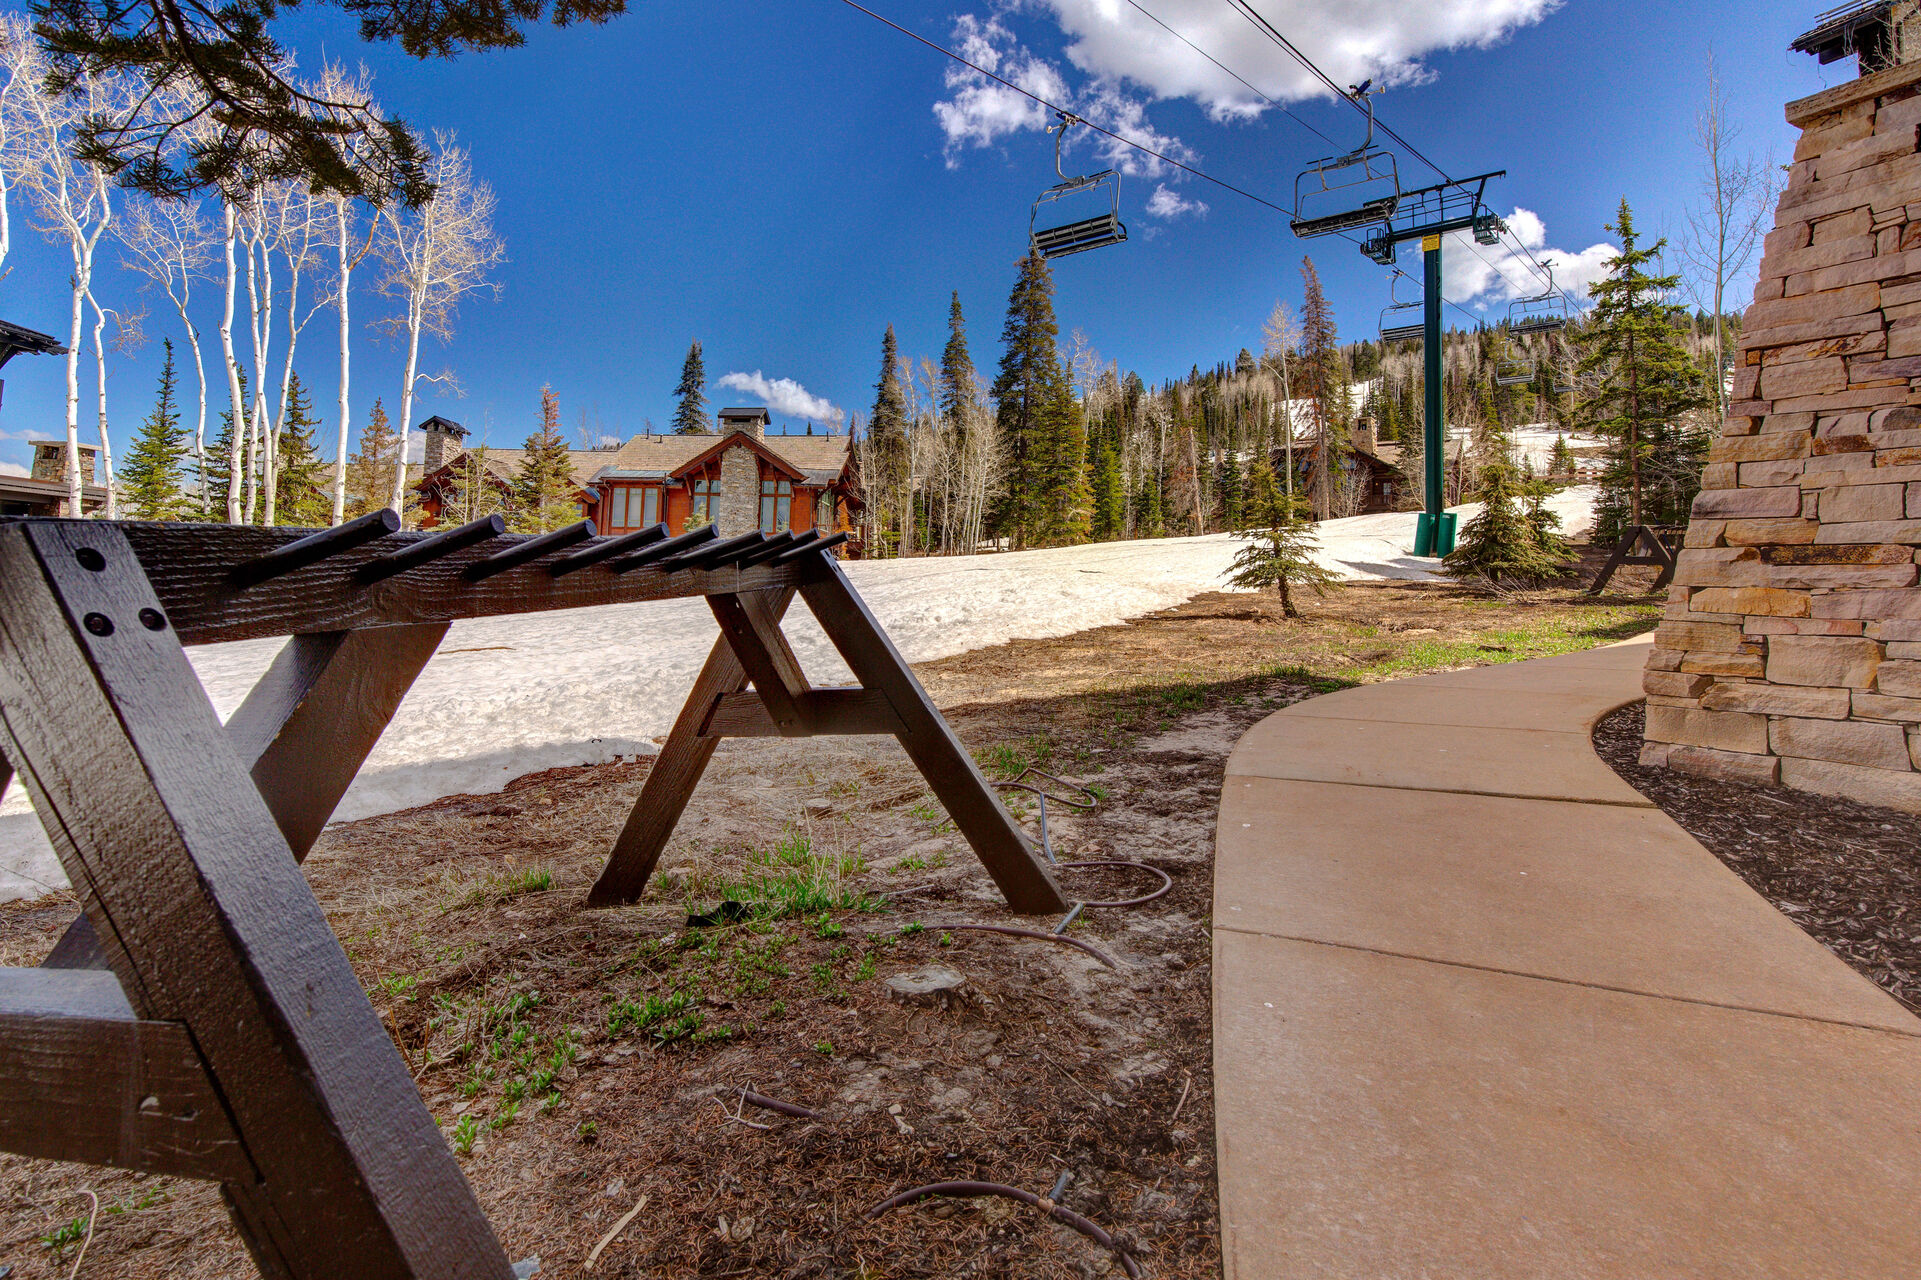 Arrowleaf Communal Amenities including billiard lounge, seated fireplace area, ski lockers, outdoor firepit, and slopeside hot tub